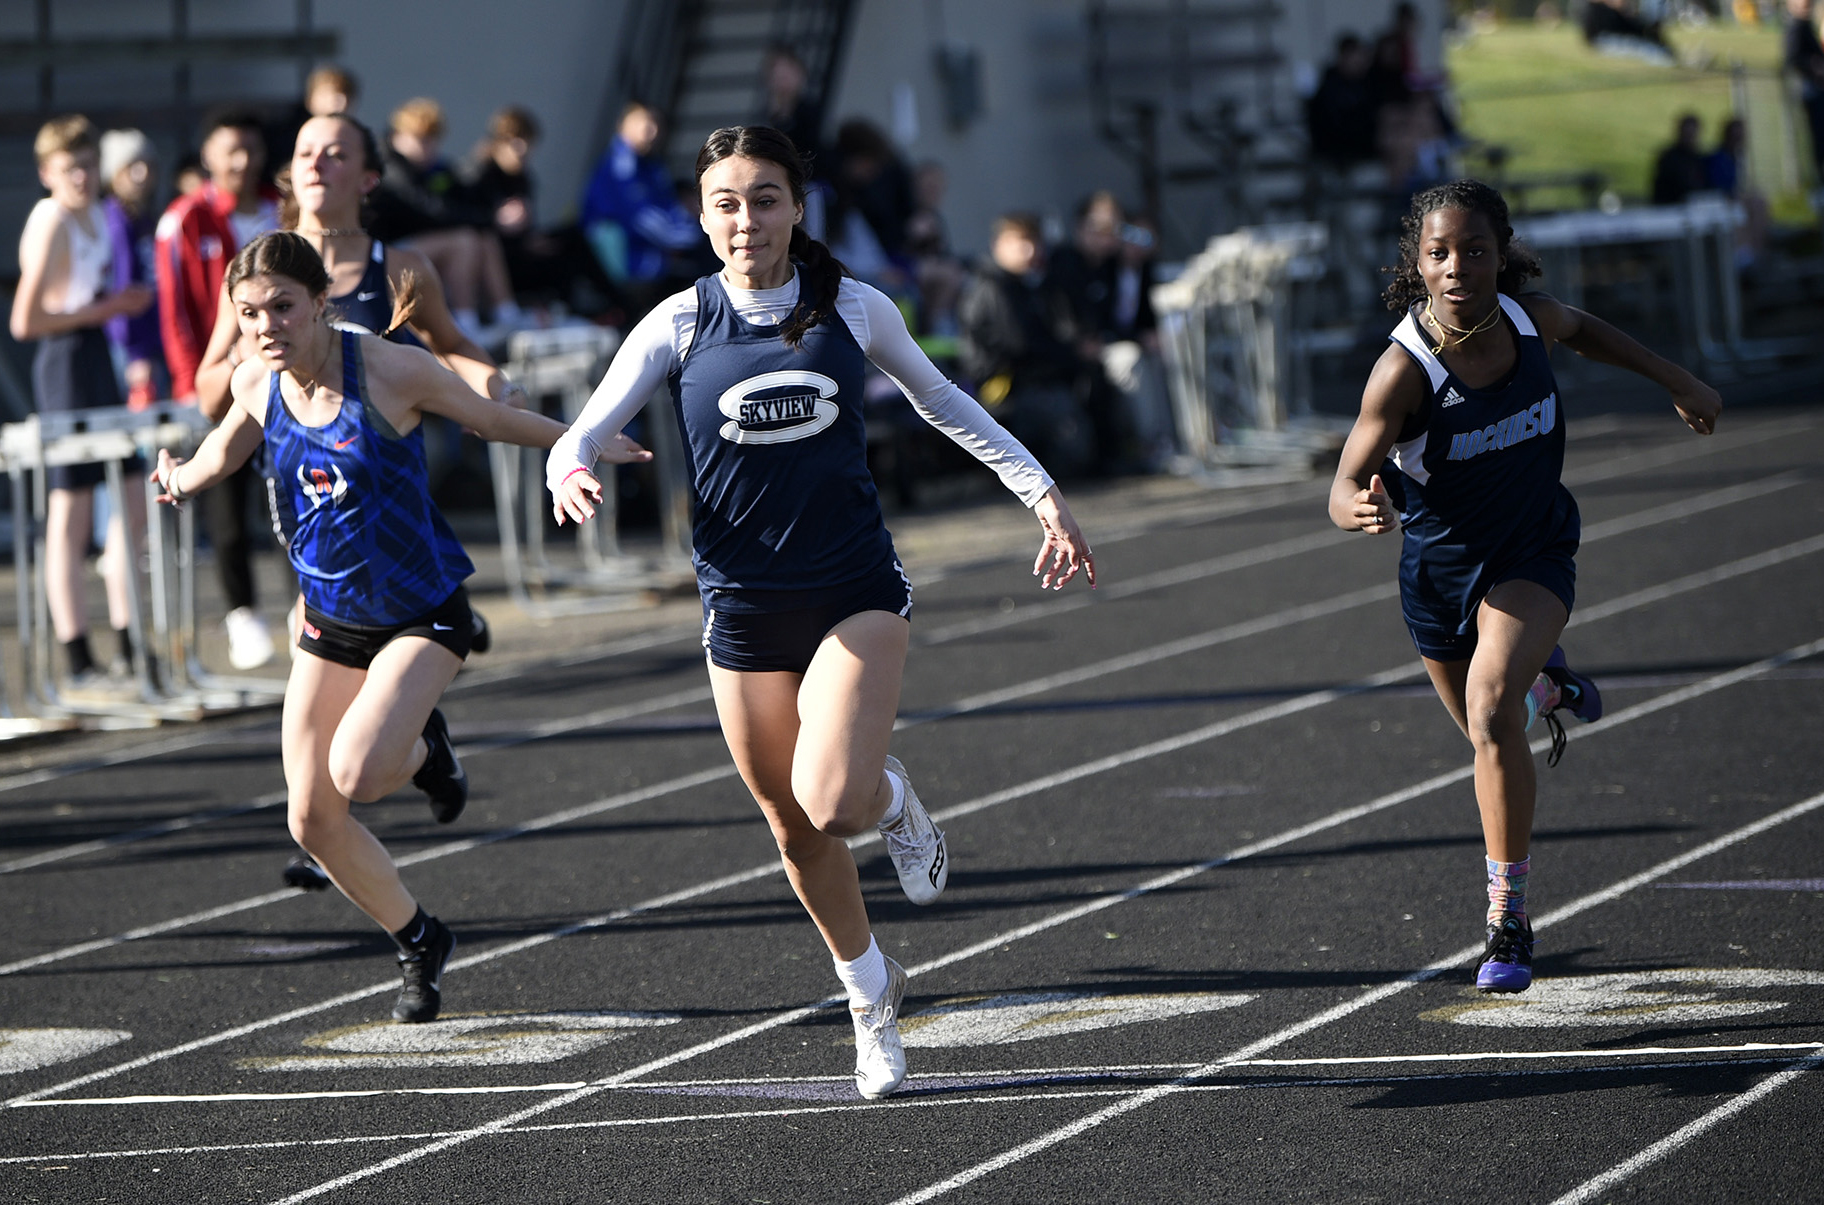 Skyview’s Dea Covarrubias (center), shown here running the 100 meters at the John Ingram Twilight Invitational track and field meet in April, won the District 4 4A 100 meters on Wednesday at McKenzie Stadium.